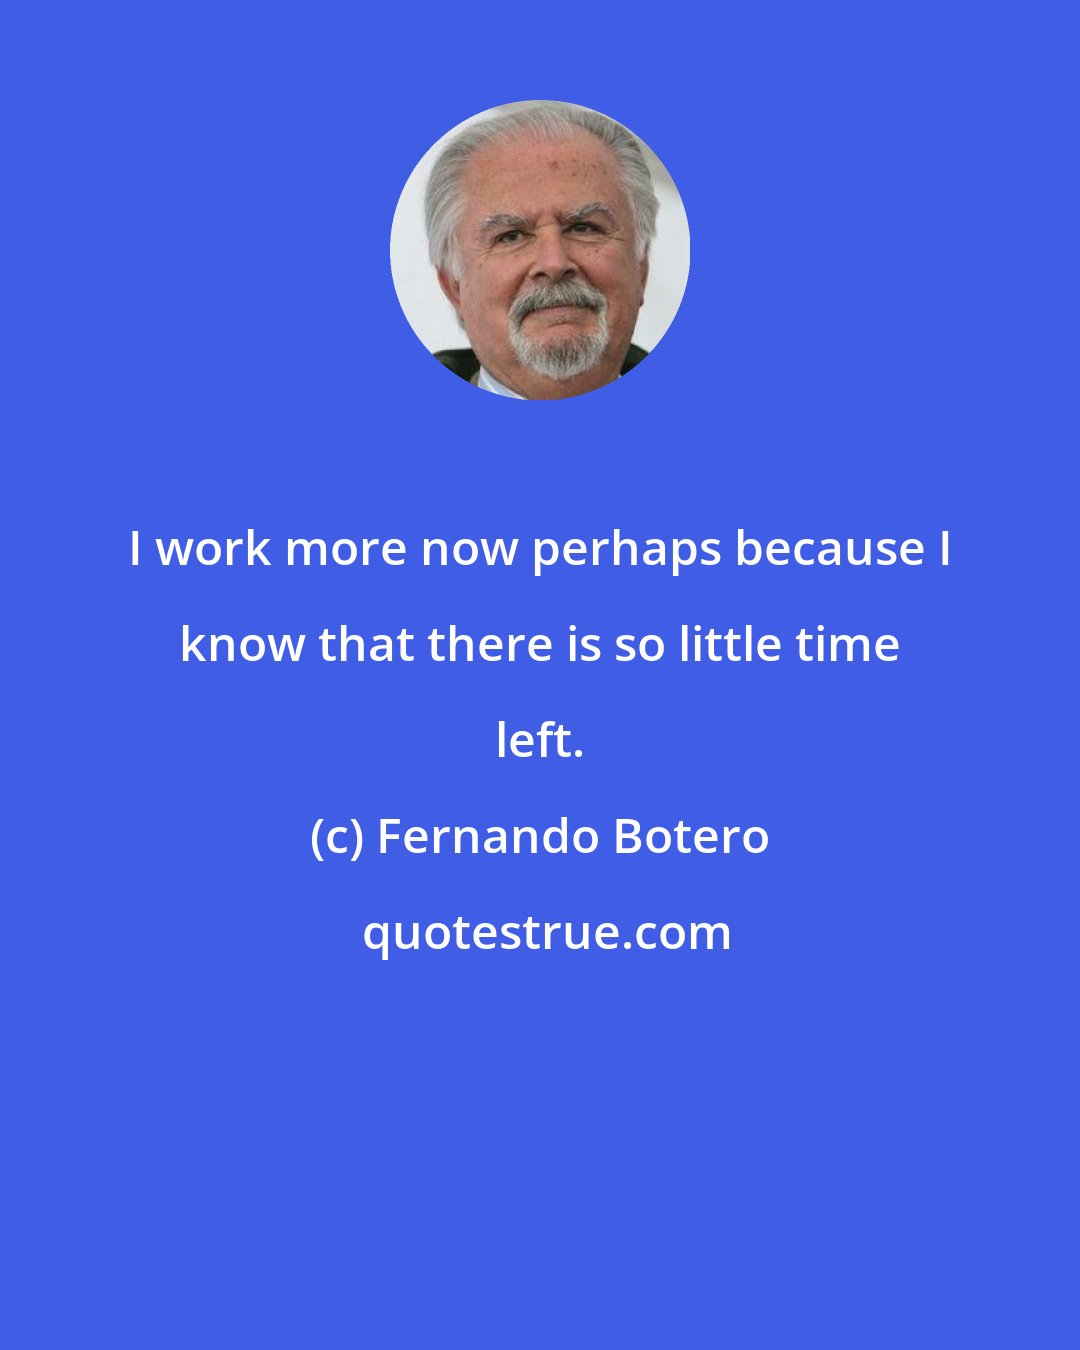 Fernando Botero: I work more now perhaps because I know that there is so little time left.